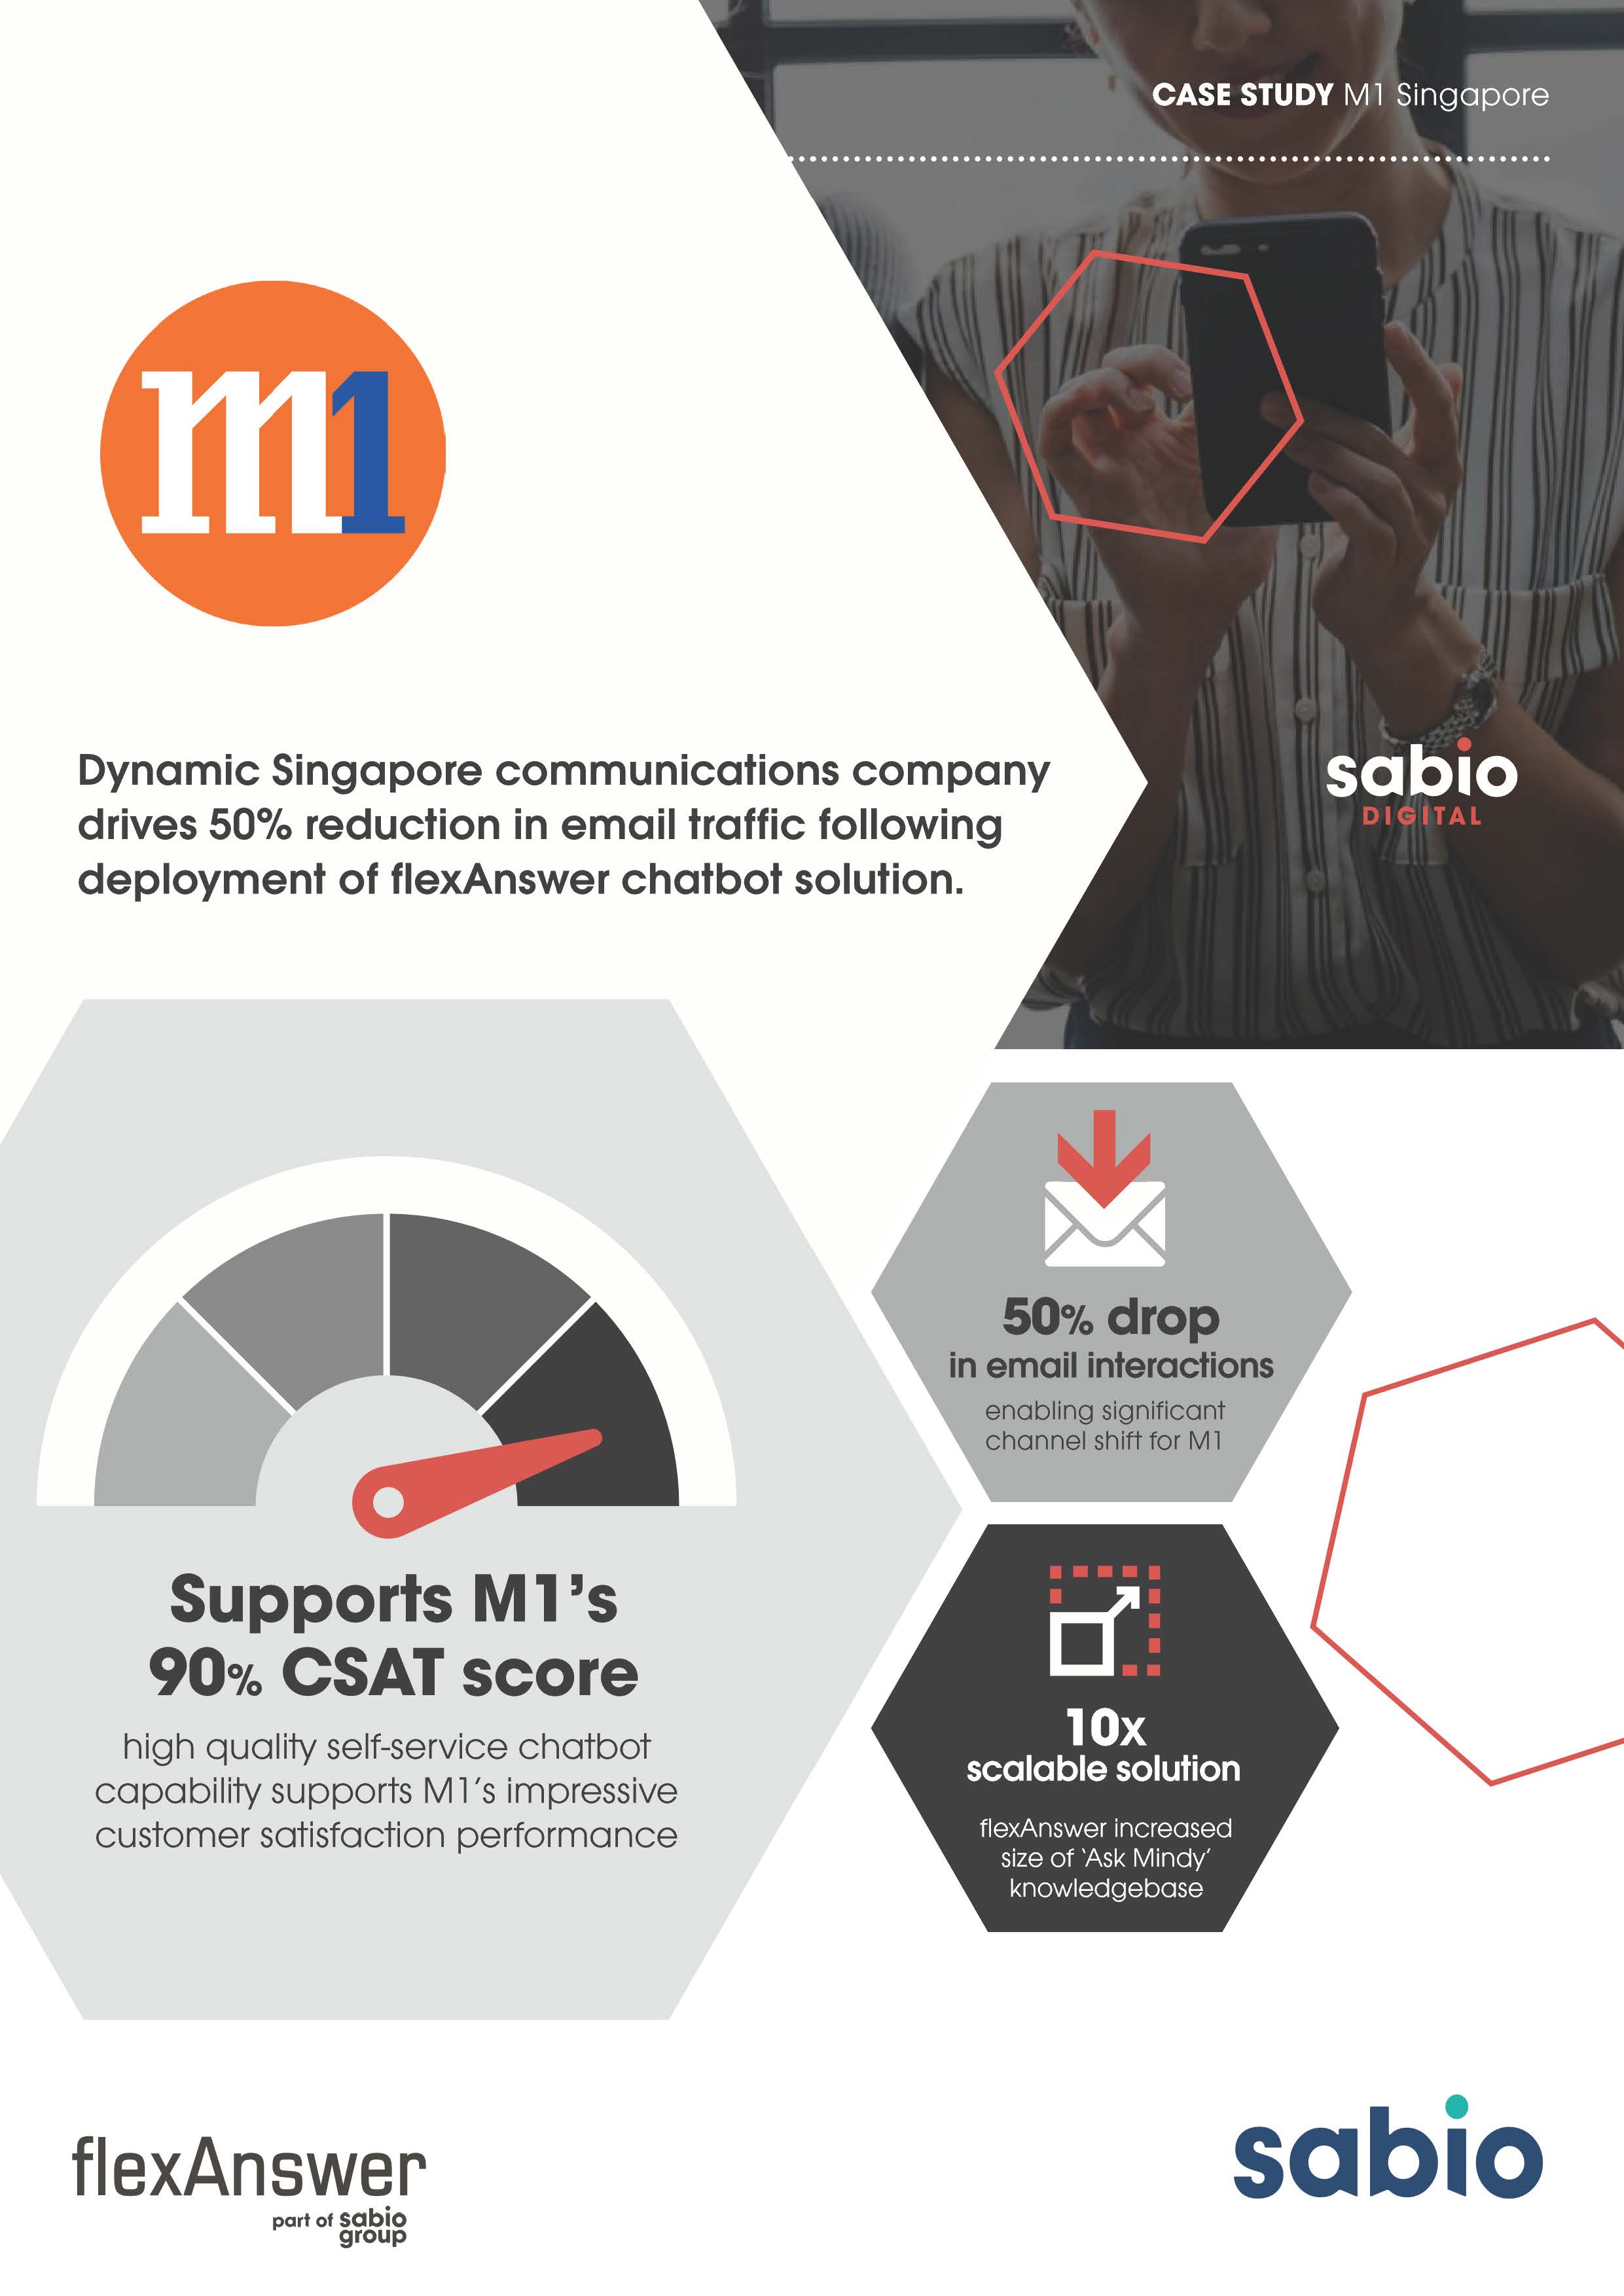 Dynamic Singapore communications company drives 50% reduction in email traffic following deployment of flexAnswer chatbot solution